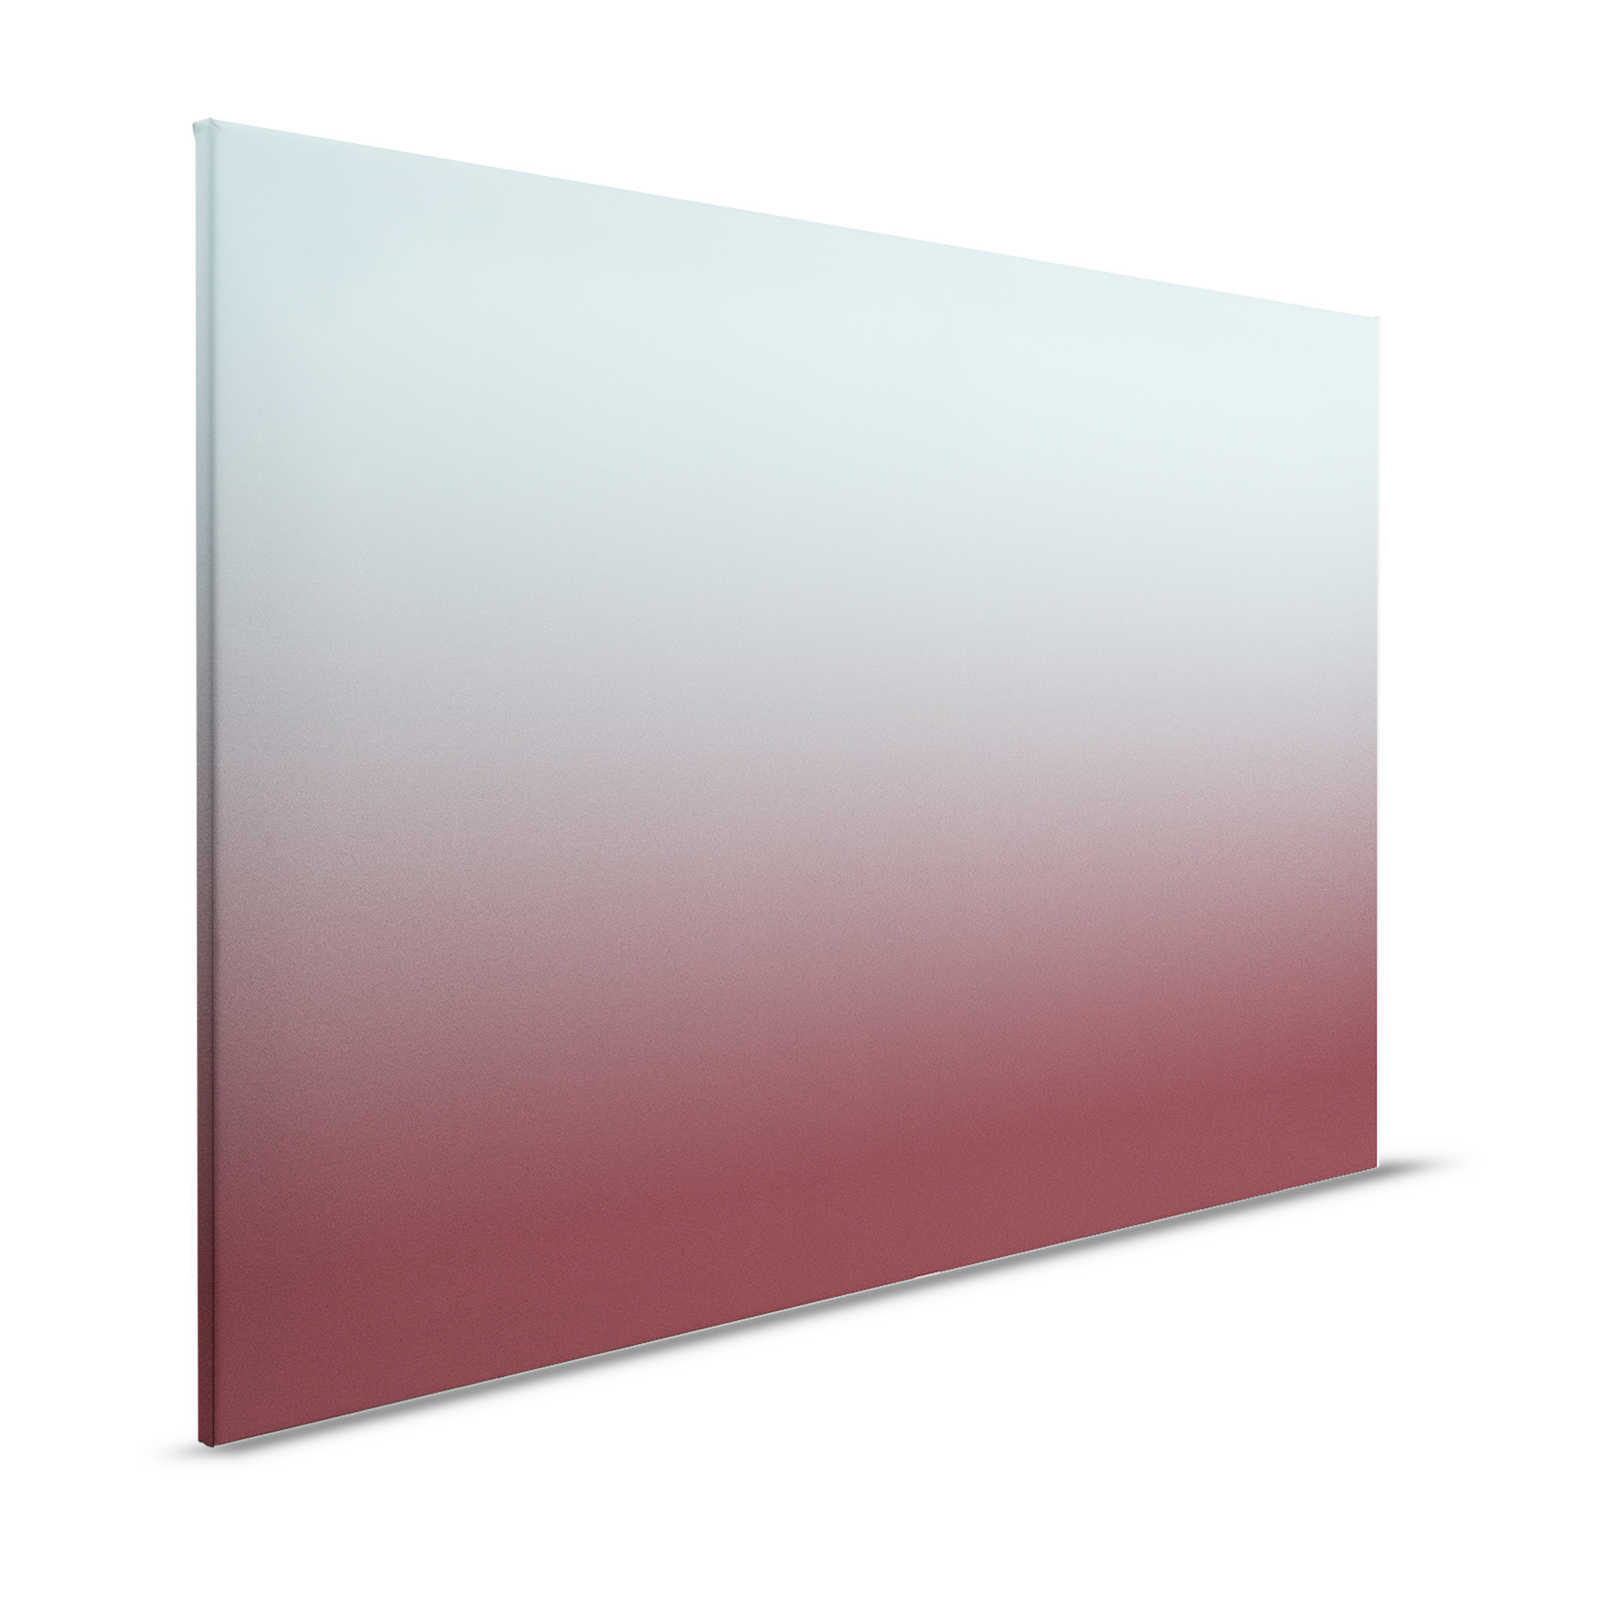 Colour Studio 3 - Ombre Canvas Painting Light Blue & Wine Red with Gradient - 1.20 m x 0.80 m
